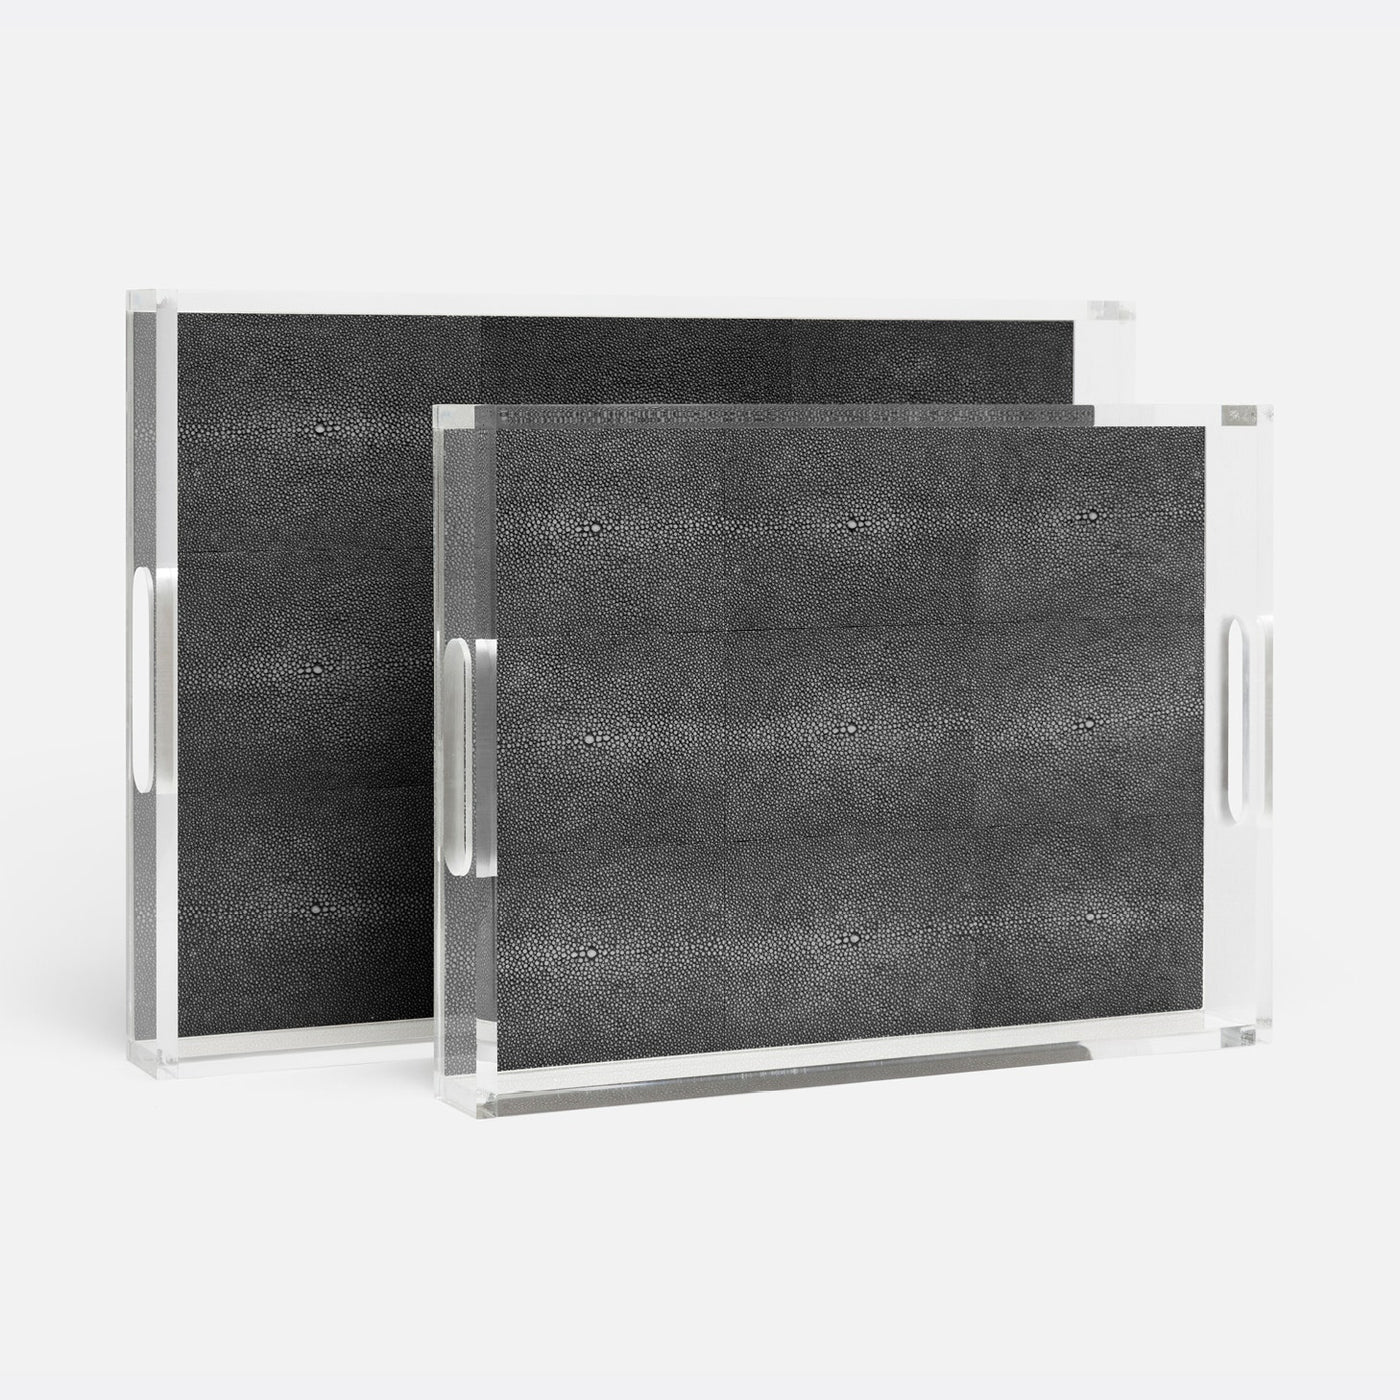 TRAY ACRYLIC WITH GRAY FAUX SHAGREEN INSERT (Available in 2 Sizes)